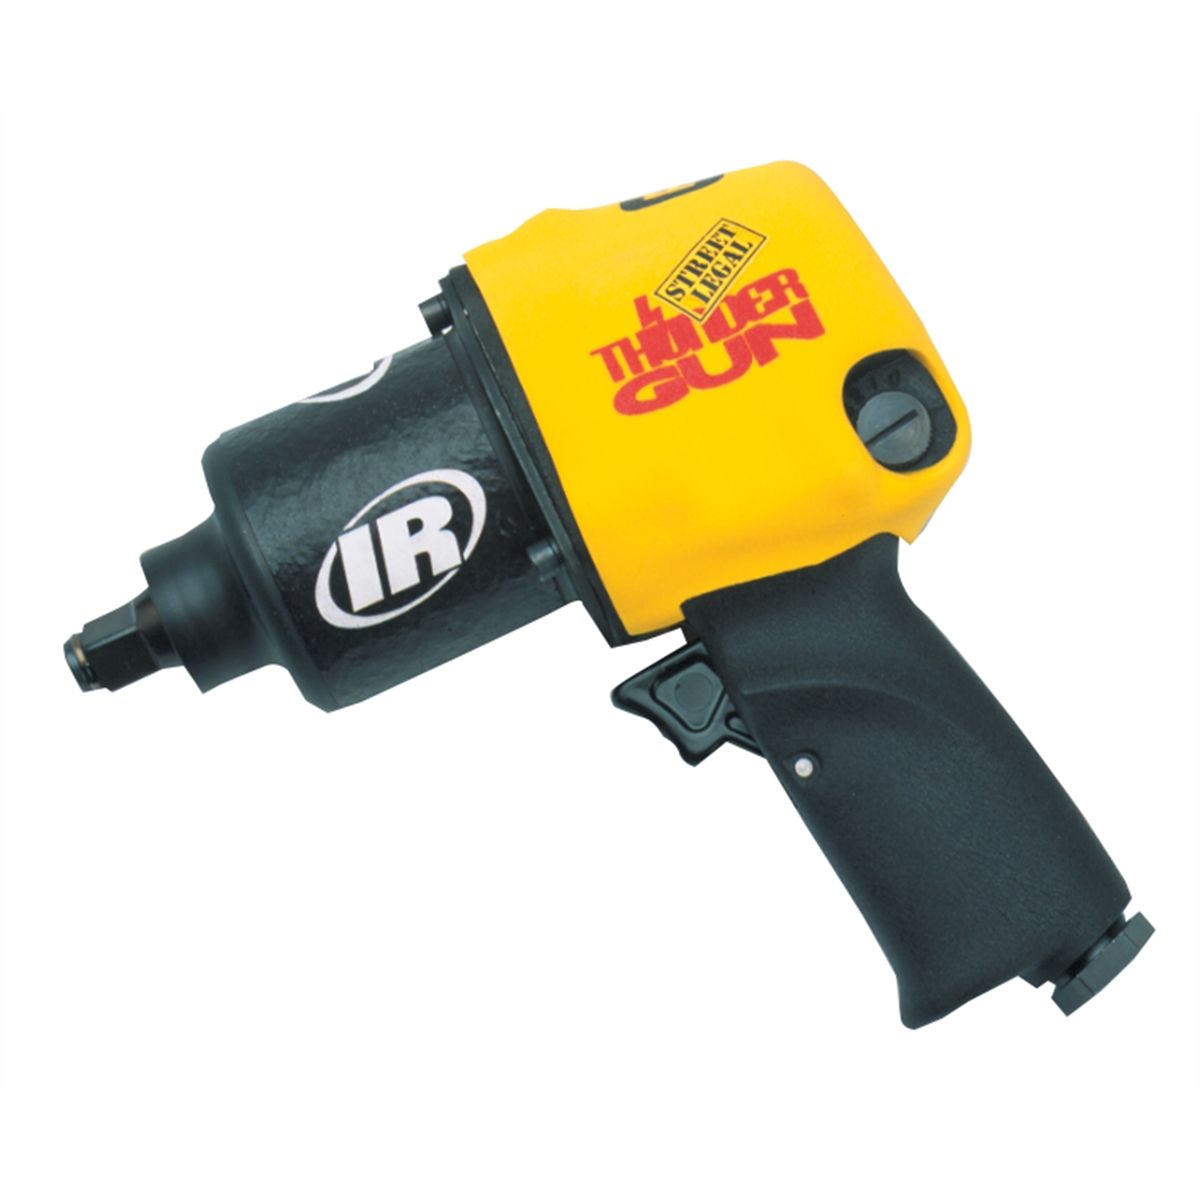 PRO 1/2" IN Drive 90 Degree Angle AIR IMPACT Wrench Tool Jumbo Hammer Mechanism